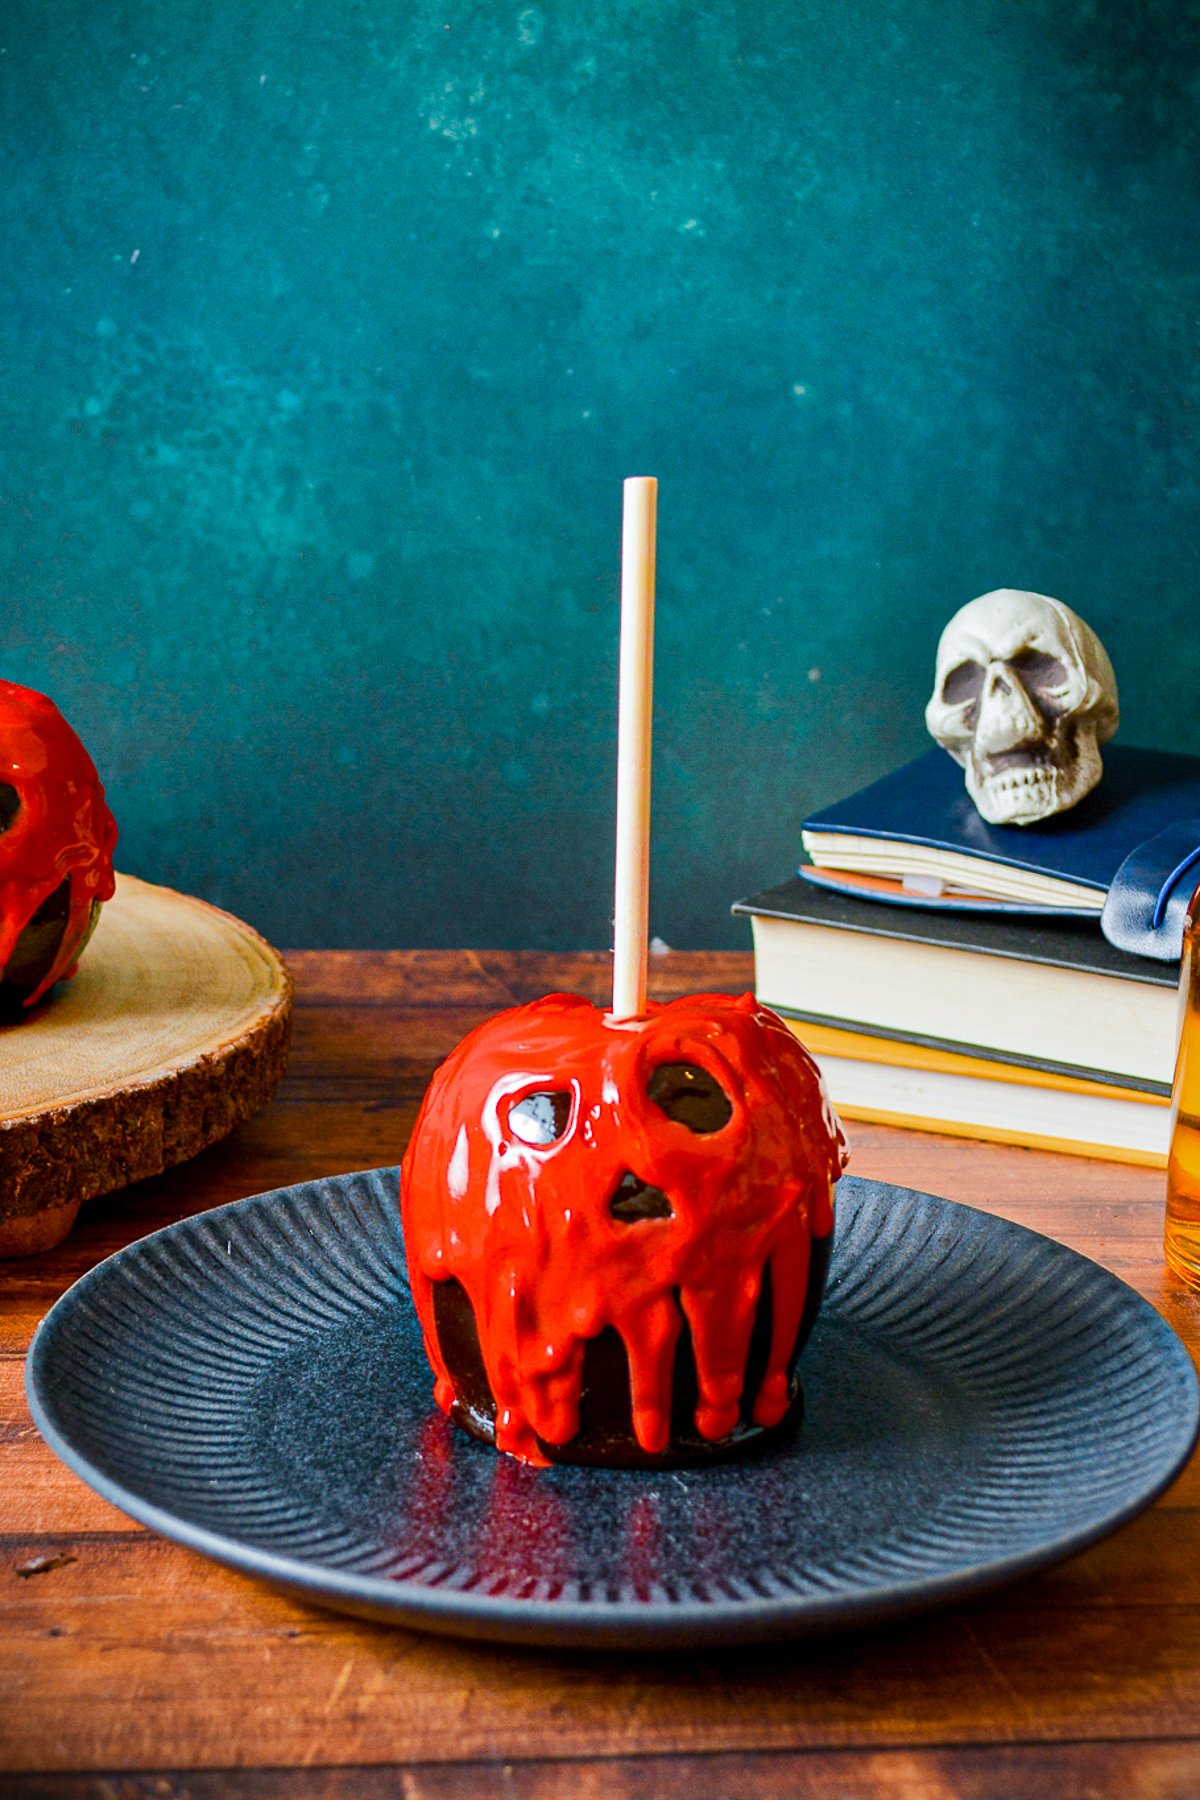 One Poison Apple on plate with books and skull in background.